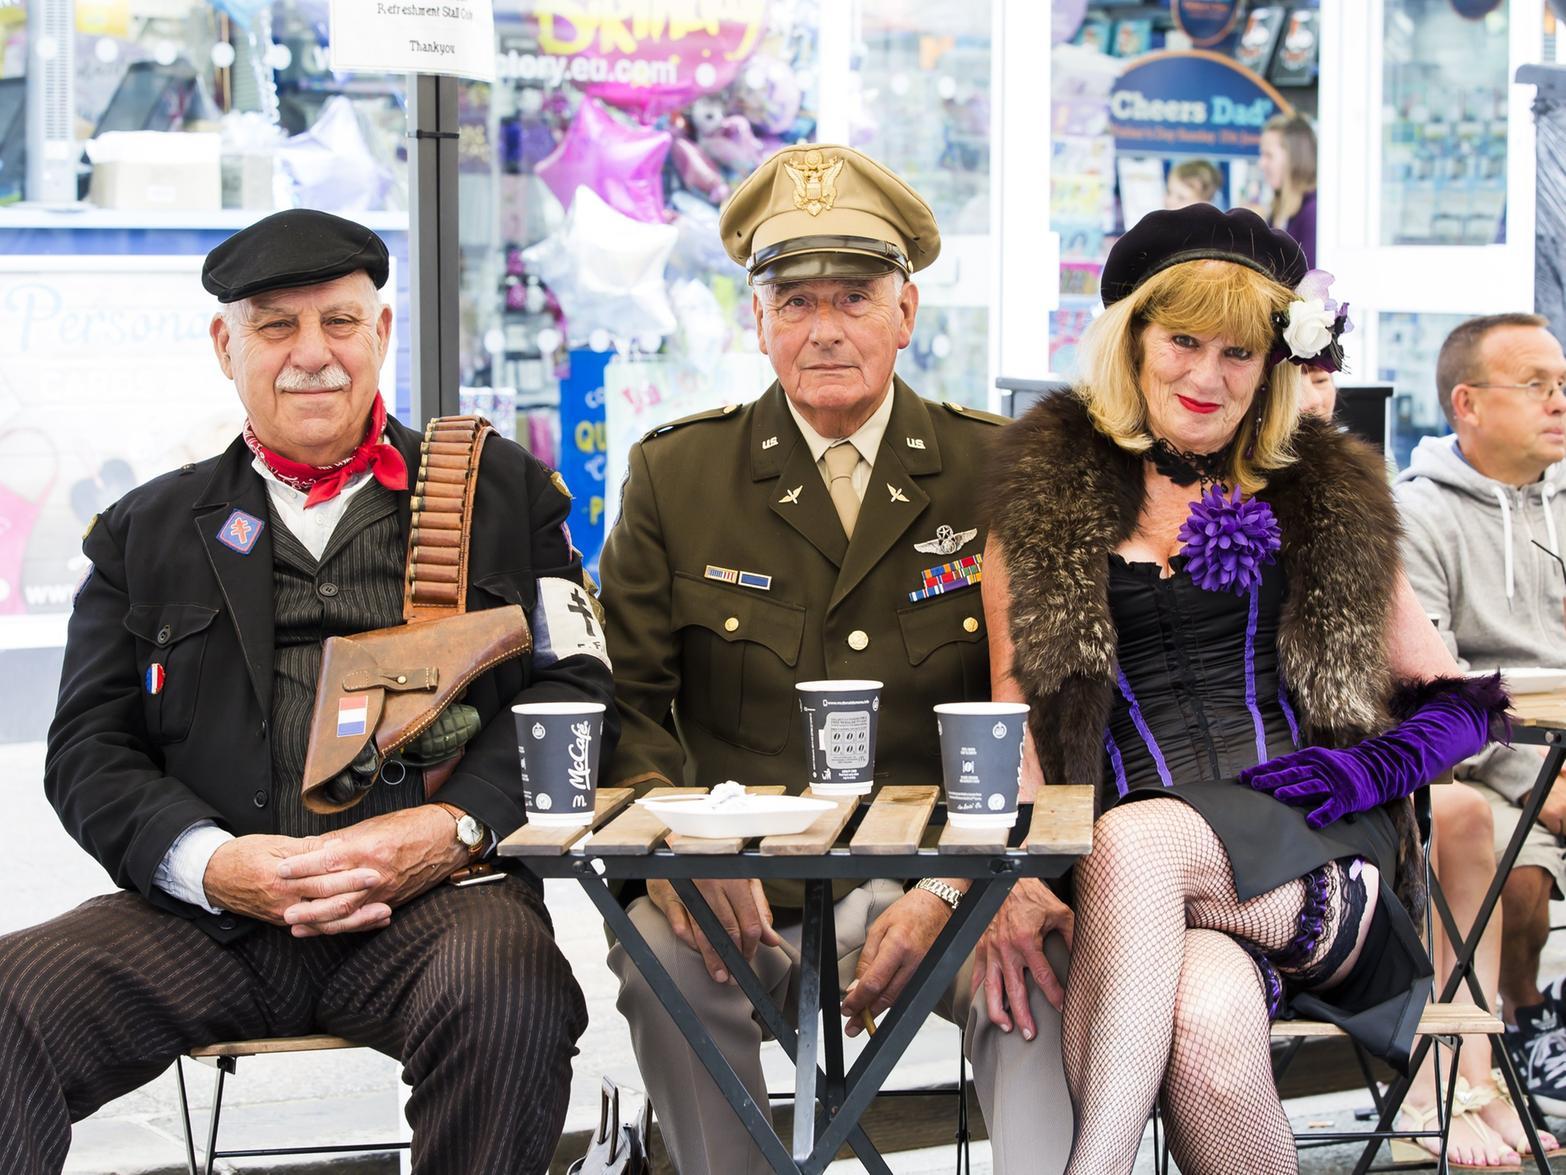 Of course when June rolls around we can expect Brighouse 1940s weekend to offer up two exciting days filled with retro fun. The annual event sees tens of thousands gather in the town and enjoying many stalls, activities and entertainment on offer.